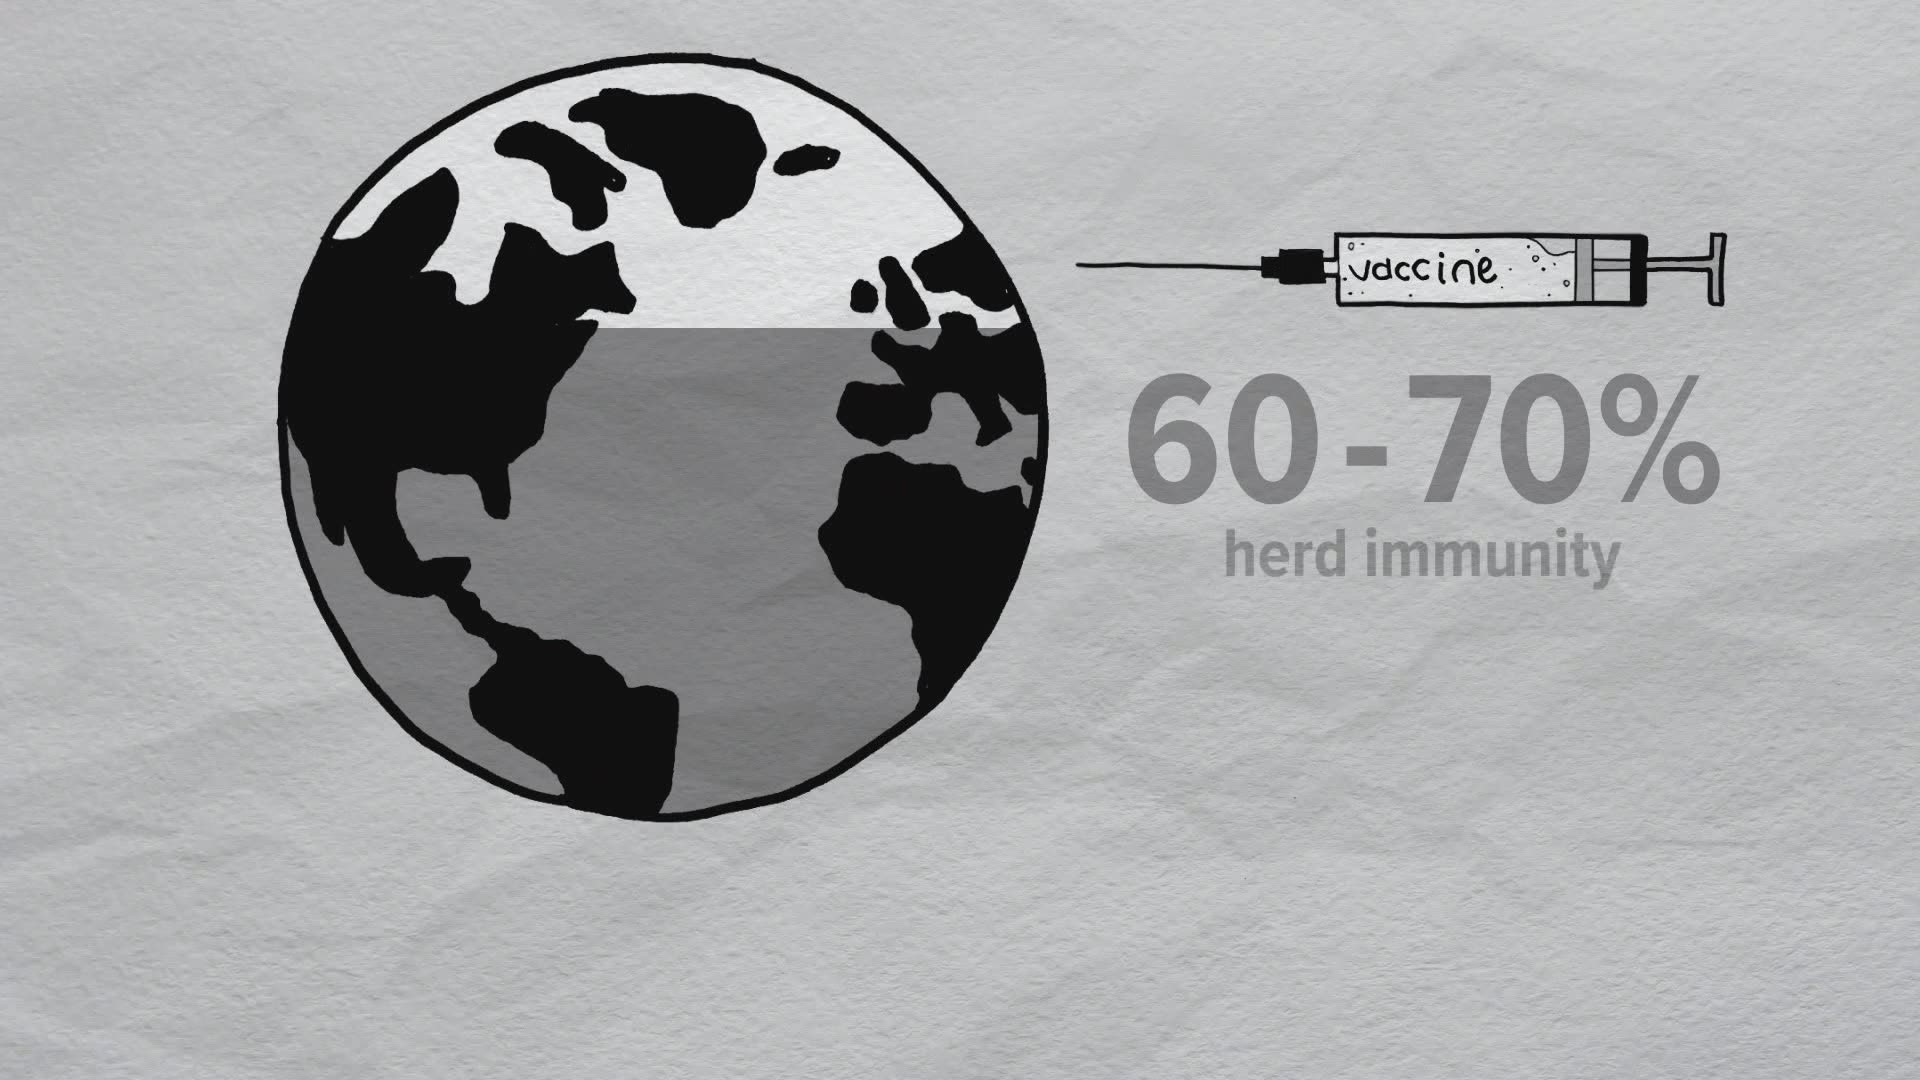 A local epidemiologist from Baylor University breaks down the risks and concerns of herd immunity in the U.S.